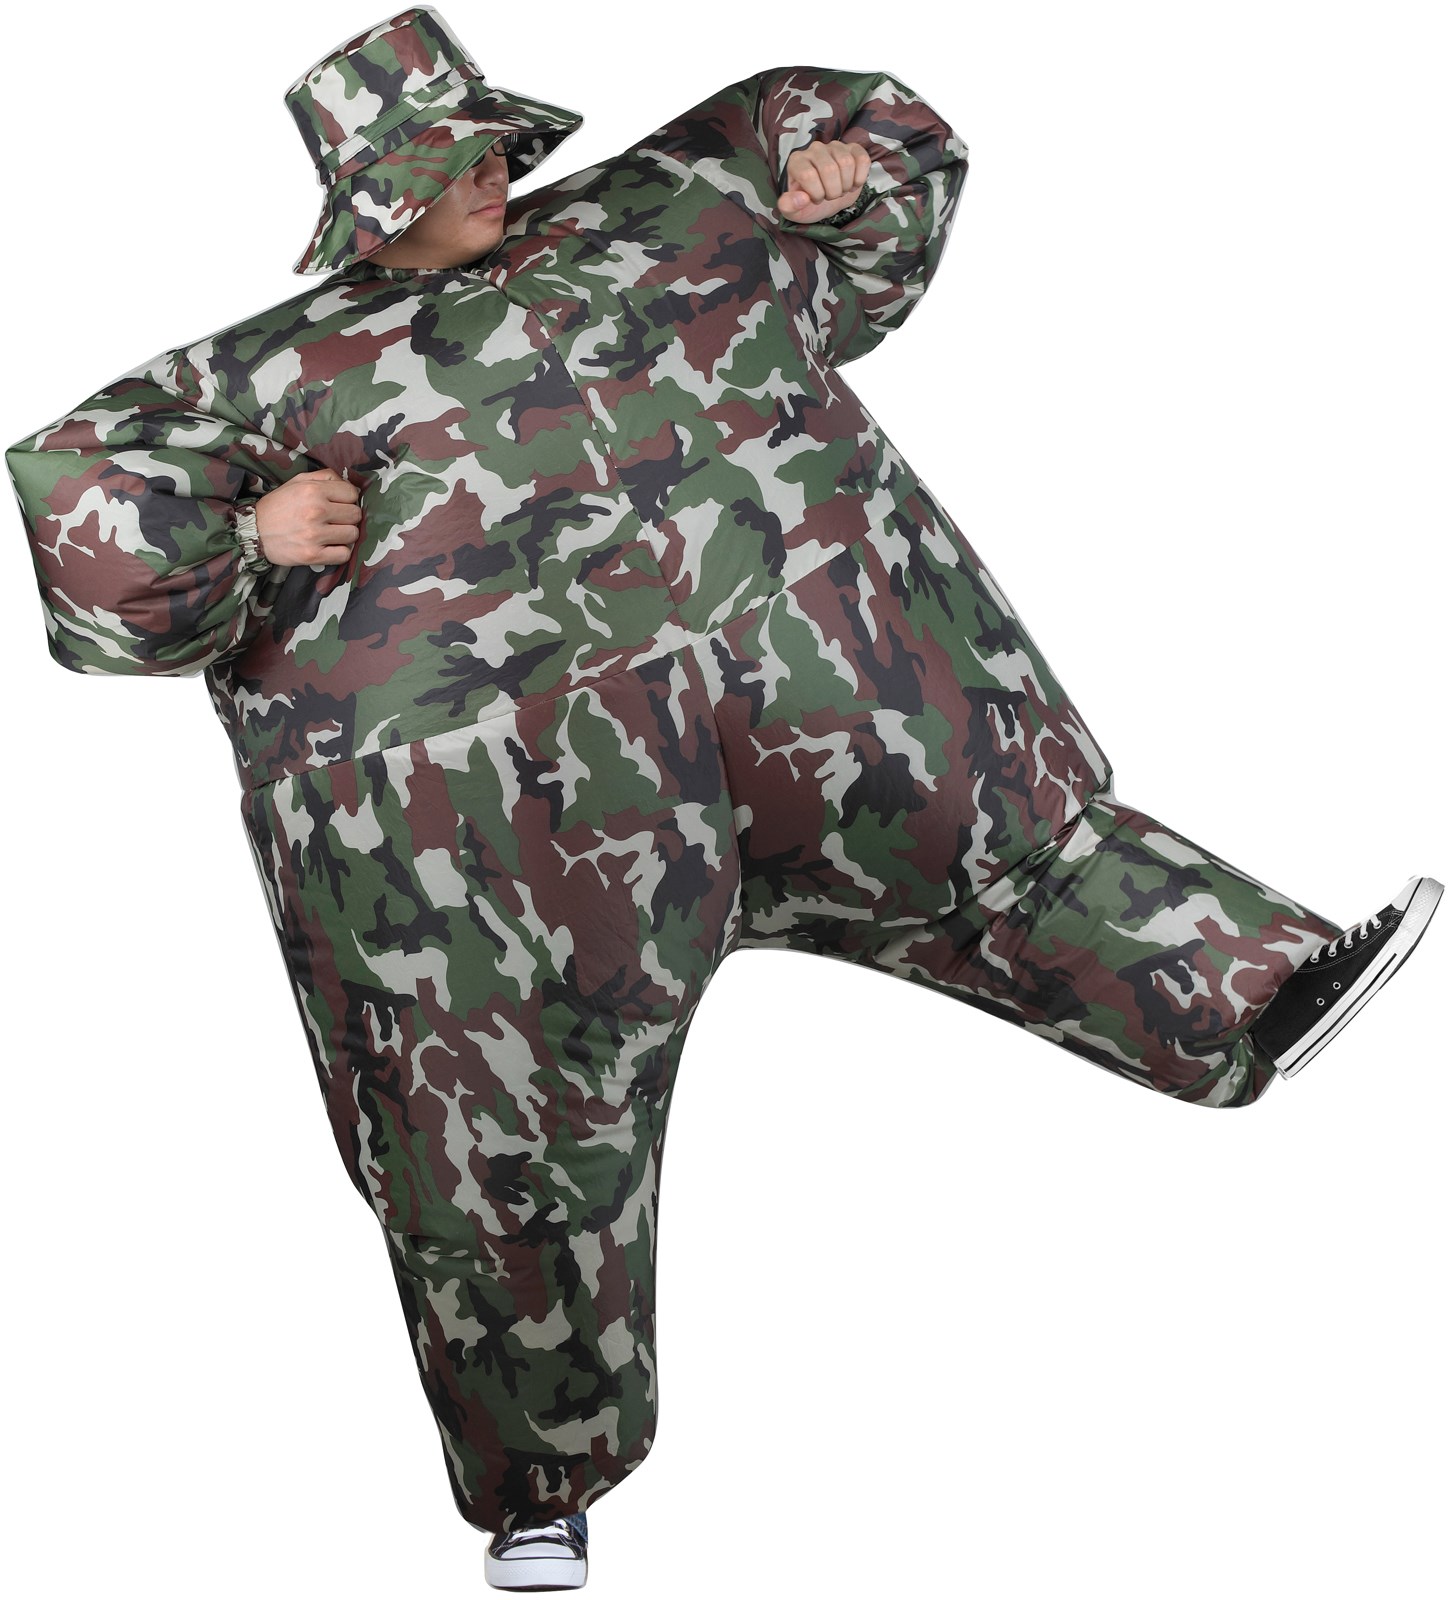 Inflatable Adult Camosuit Costume